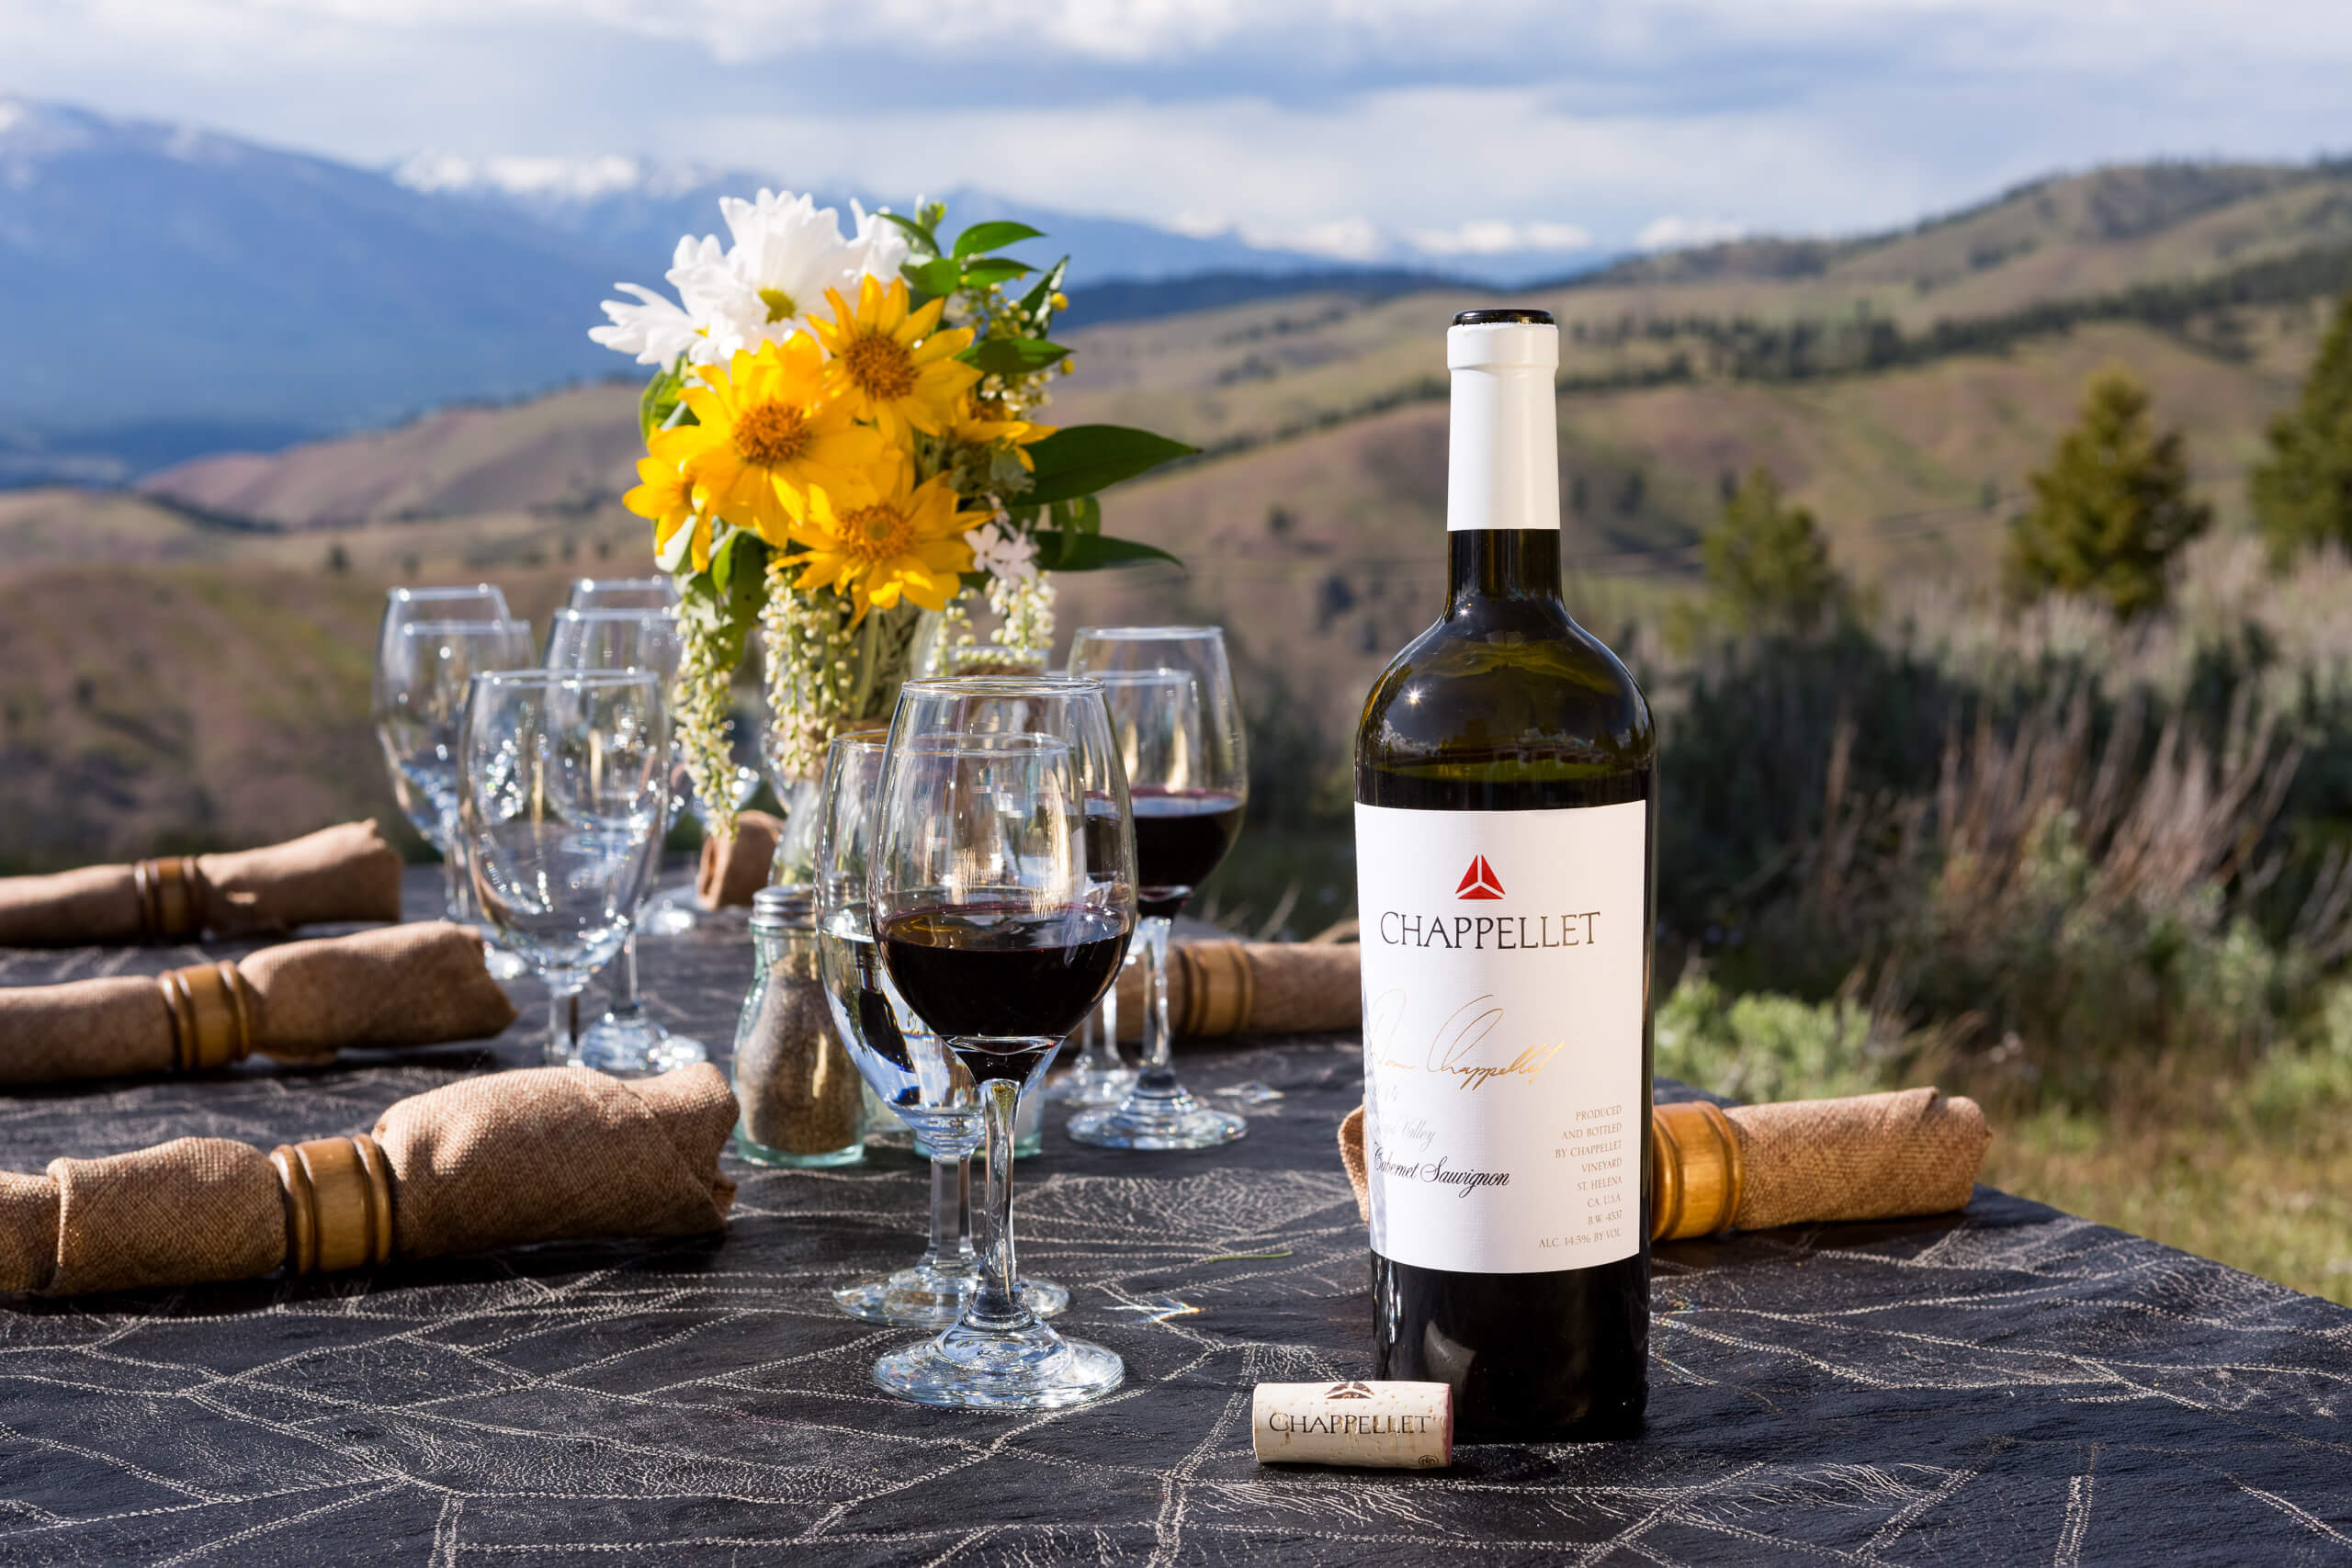 Chappellet wine event on top of mountain